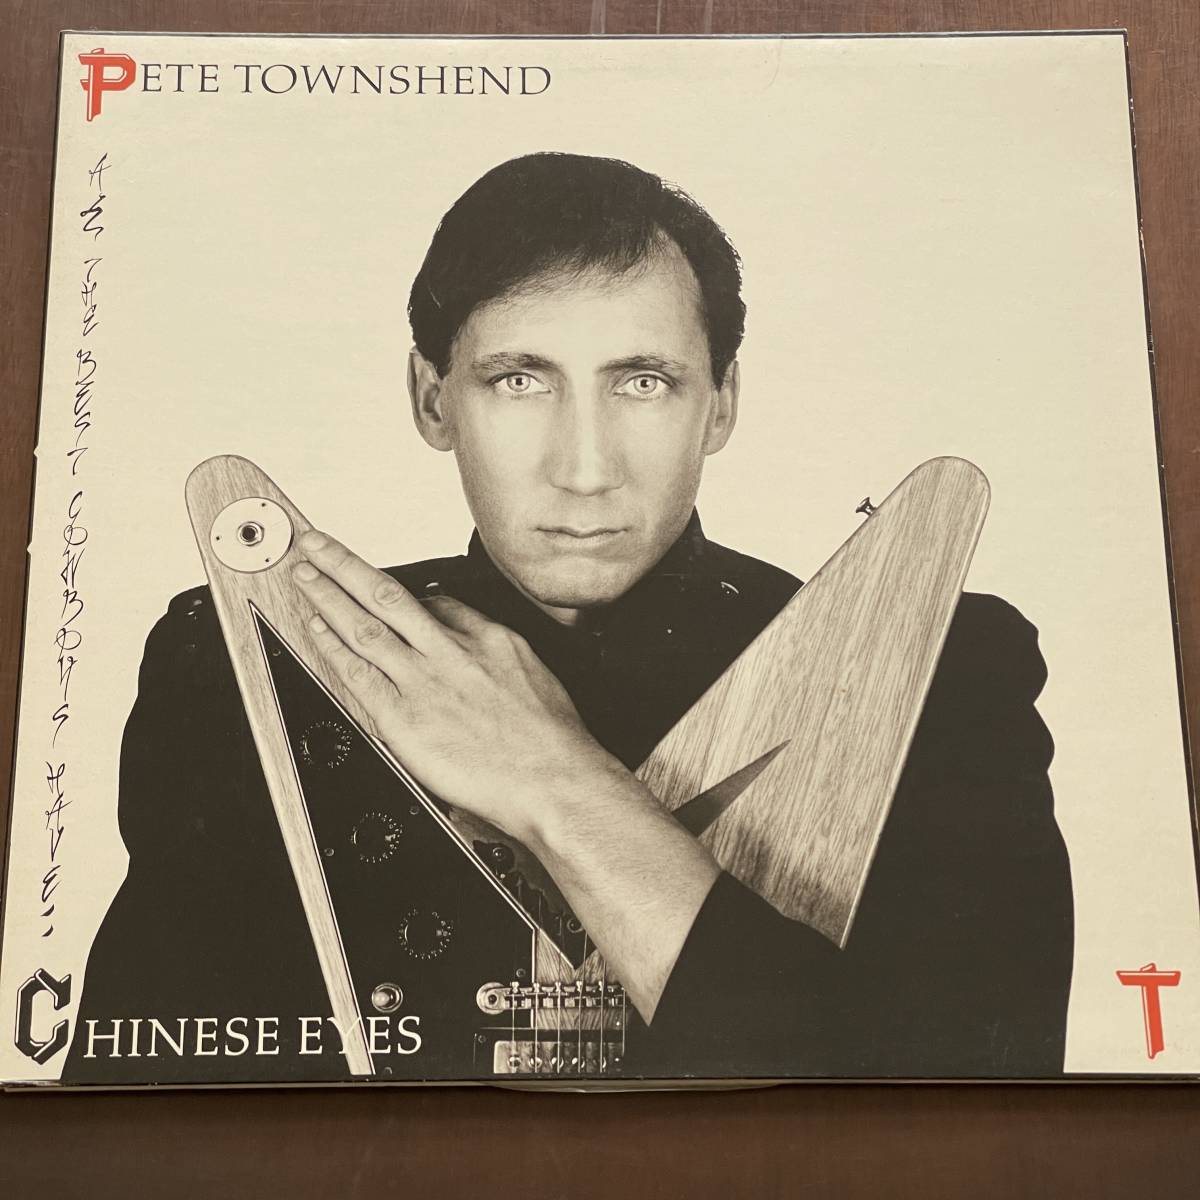 【LP】Chinese Eyes / Pete Townshend 【輸入盤】【チャイニーズ・アイズ／ピート・タウンゼンド】_画像1